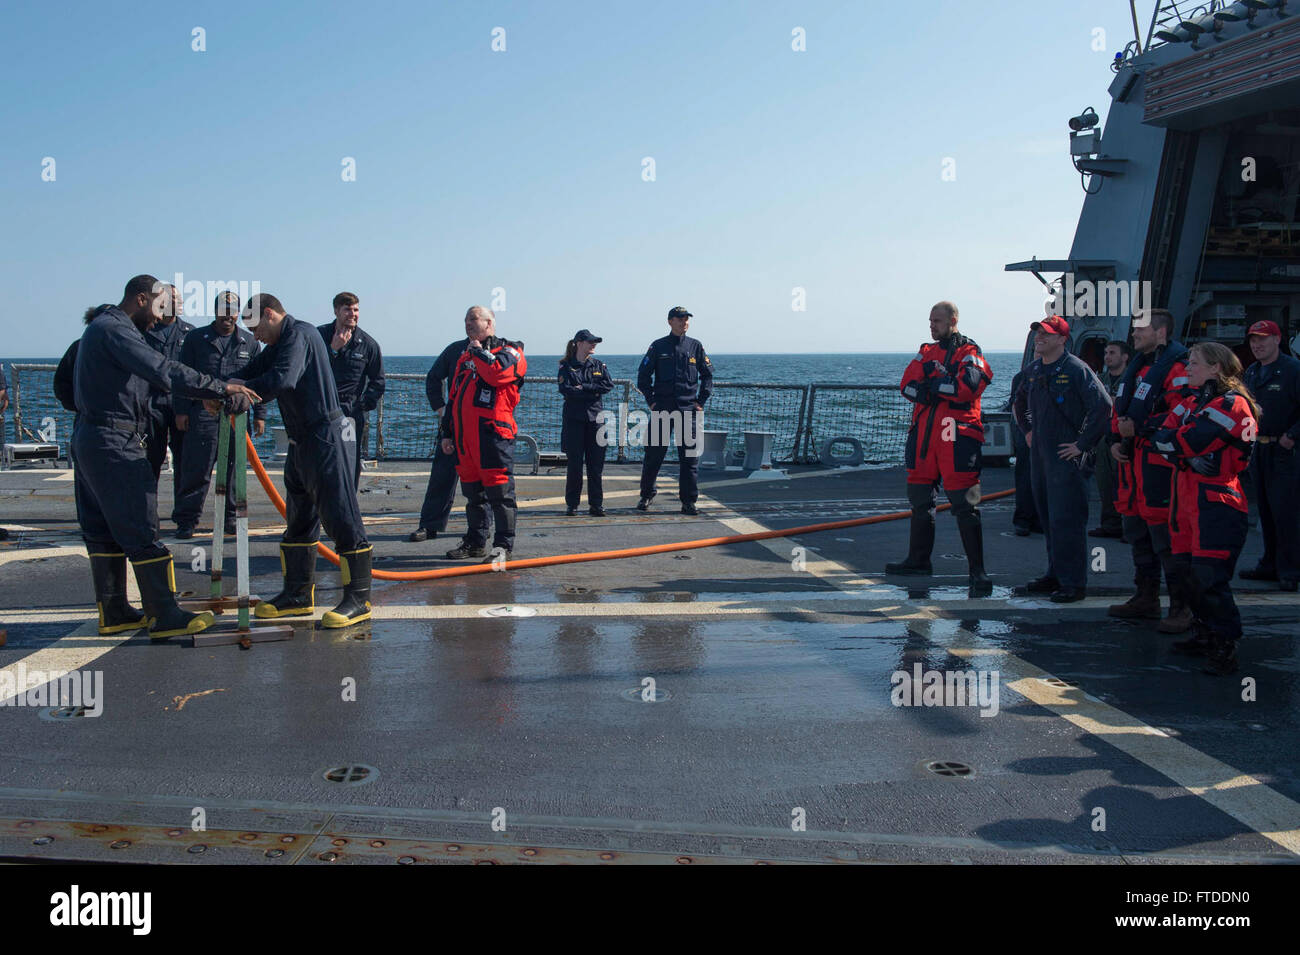 150613-N-ZE250-030 BALTIC SEA (June 13, 2015) Danish Navy sailors from the HDMS Absalon (L16) observe U.S. Navy Sailors patching a simulated ruptured pipe on the flight deck of USS Jason Dunham (DDG 109) June 13, 2015. Jason Dunham, an Arleigh Burke-class guided-missile destroyer homeported in Norfolk, is participating in exercise Baltic Operations (BALTOPS) 2015. BALTOPS is an annually recurring multinational exercise designed to enhance flexibility and interoperability, as well as demonstrate resolve of Allied and partner forces to defend the Baltic region. (U.S. Navy photo by Mass Communica Stock Photo